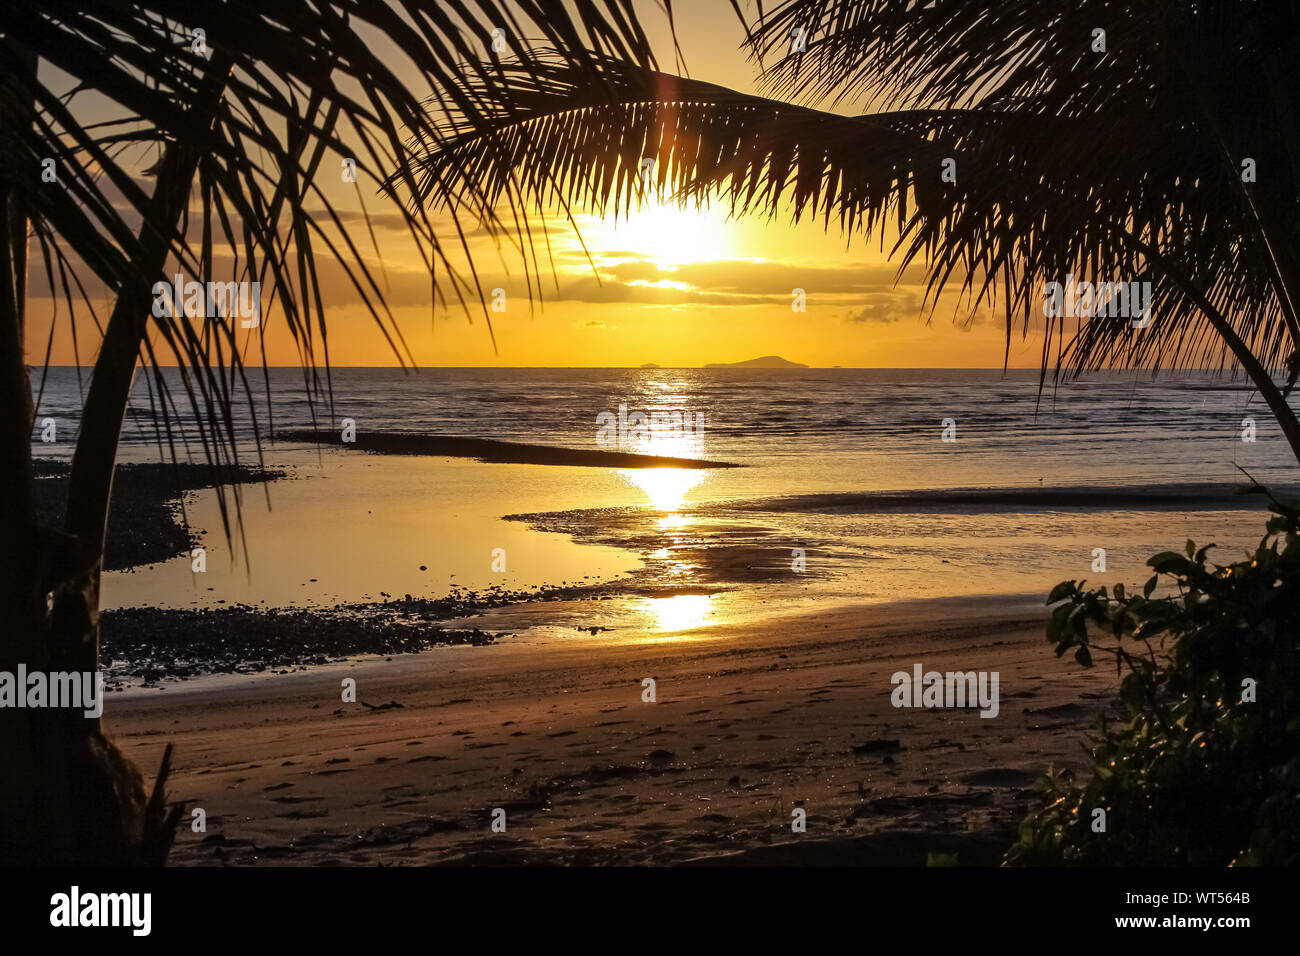 Sunset under Palm trees on a Tropical beach in Queensland, Australia Stock Photo